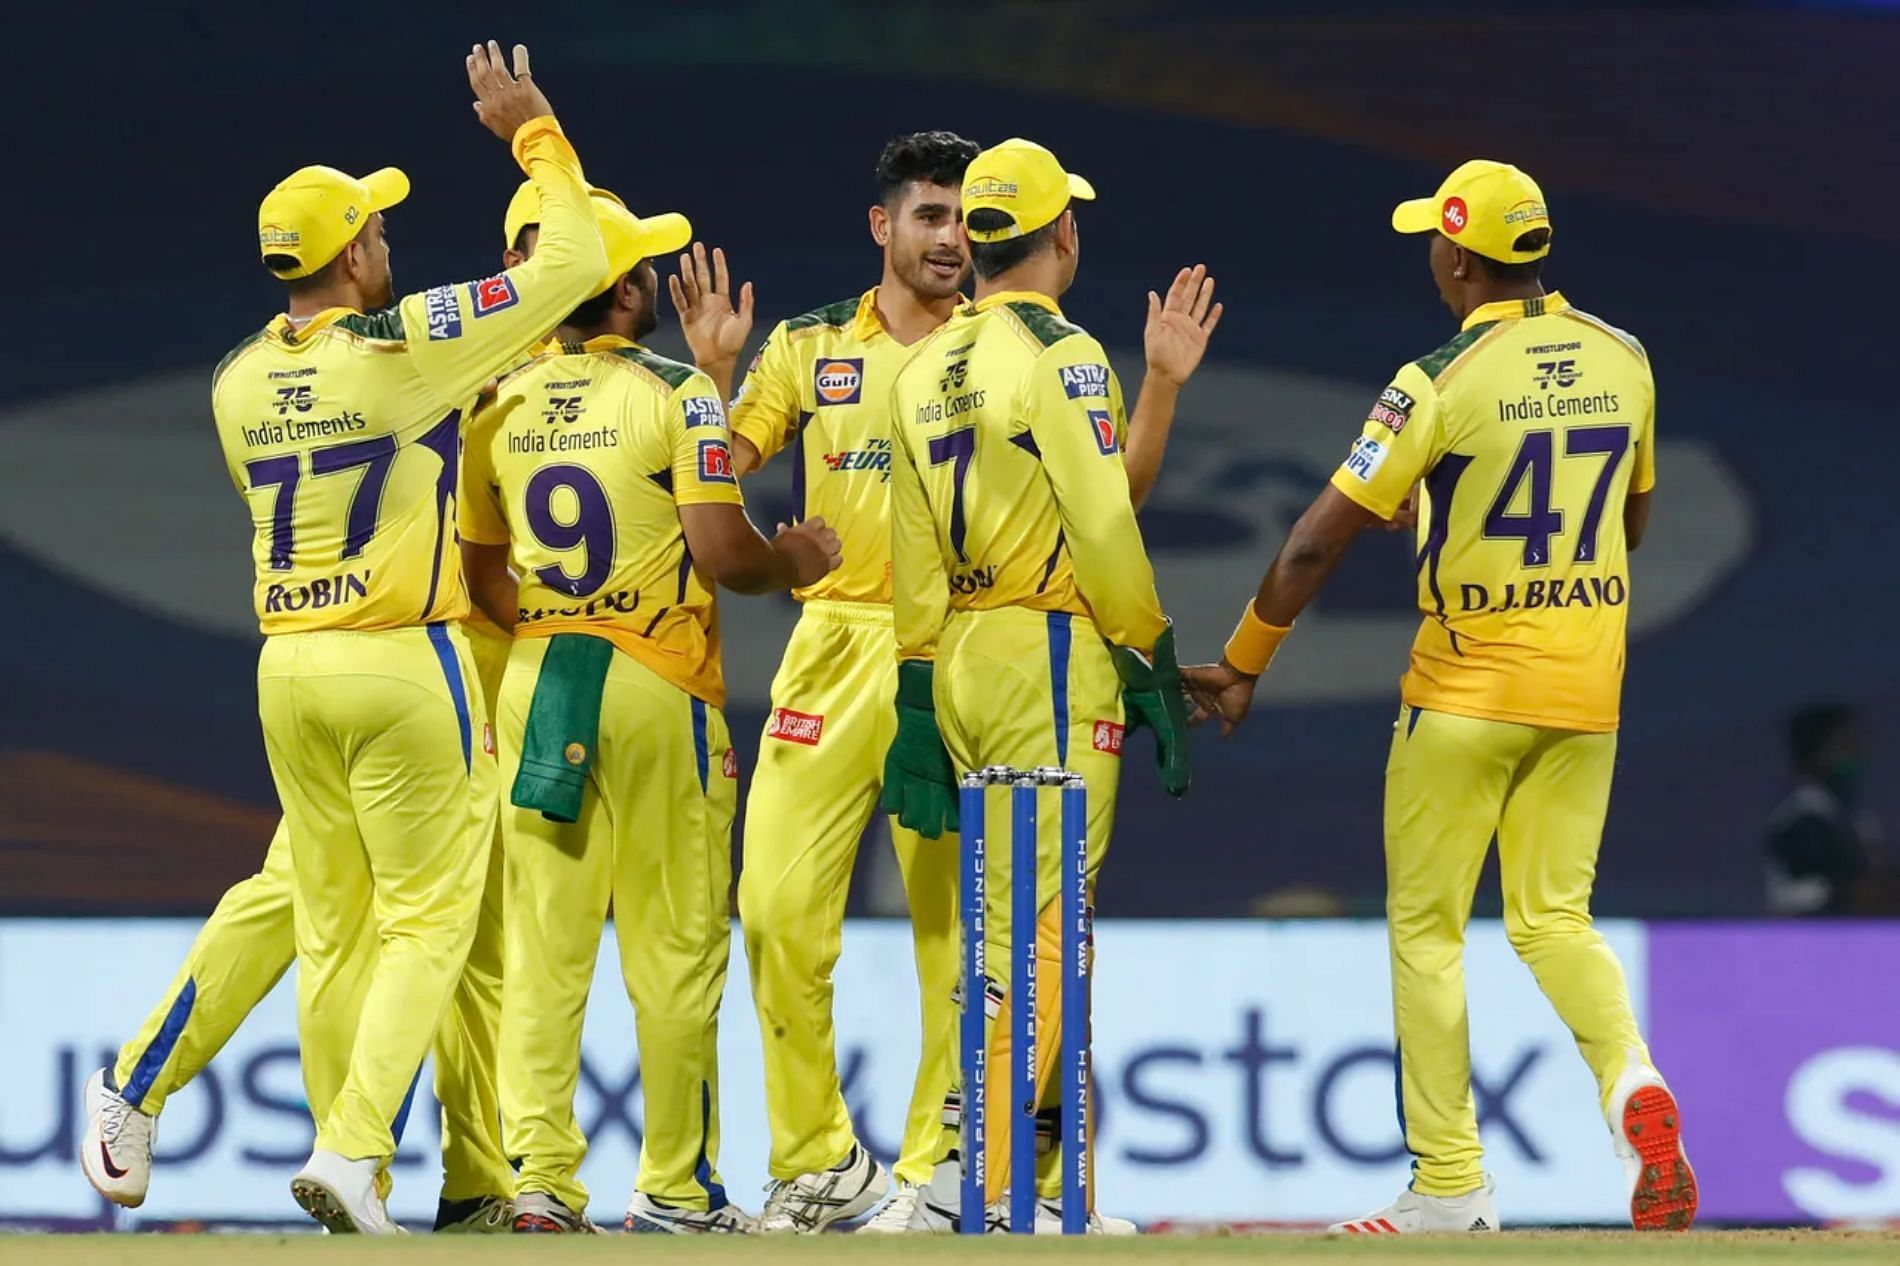 SRH vs CSK LIVE IPL 2022: All you want to know about Sunrisers Hyderabad vs Chennai Super Kings match, SRH vs CSK Top Dream11 Fantasy Picks, Team news, SRH Playing XI, CSK Playing XI, Match Timing & SRH vs CSK LIVE Streaming Details